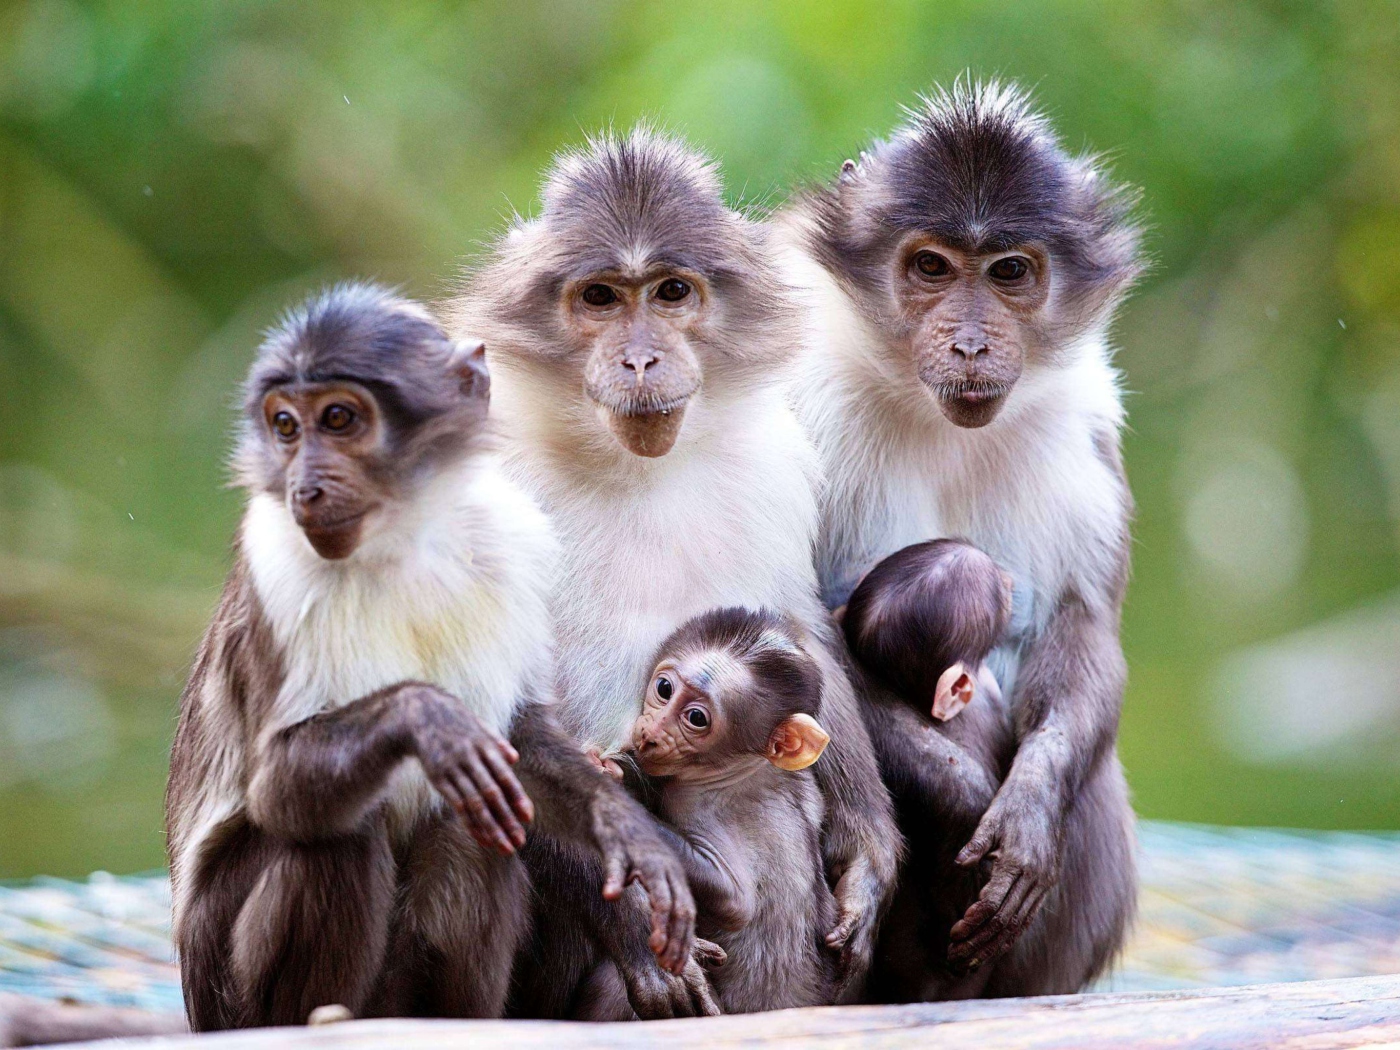 Funny Monkeys With Their Babies screenshot #1 1400x1050